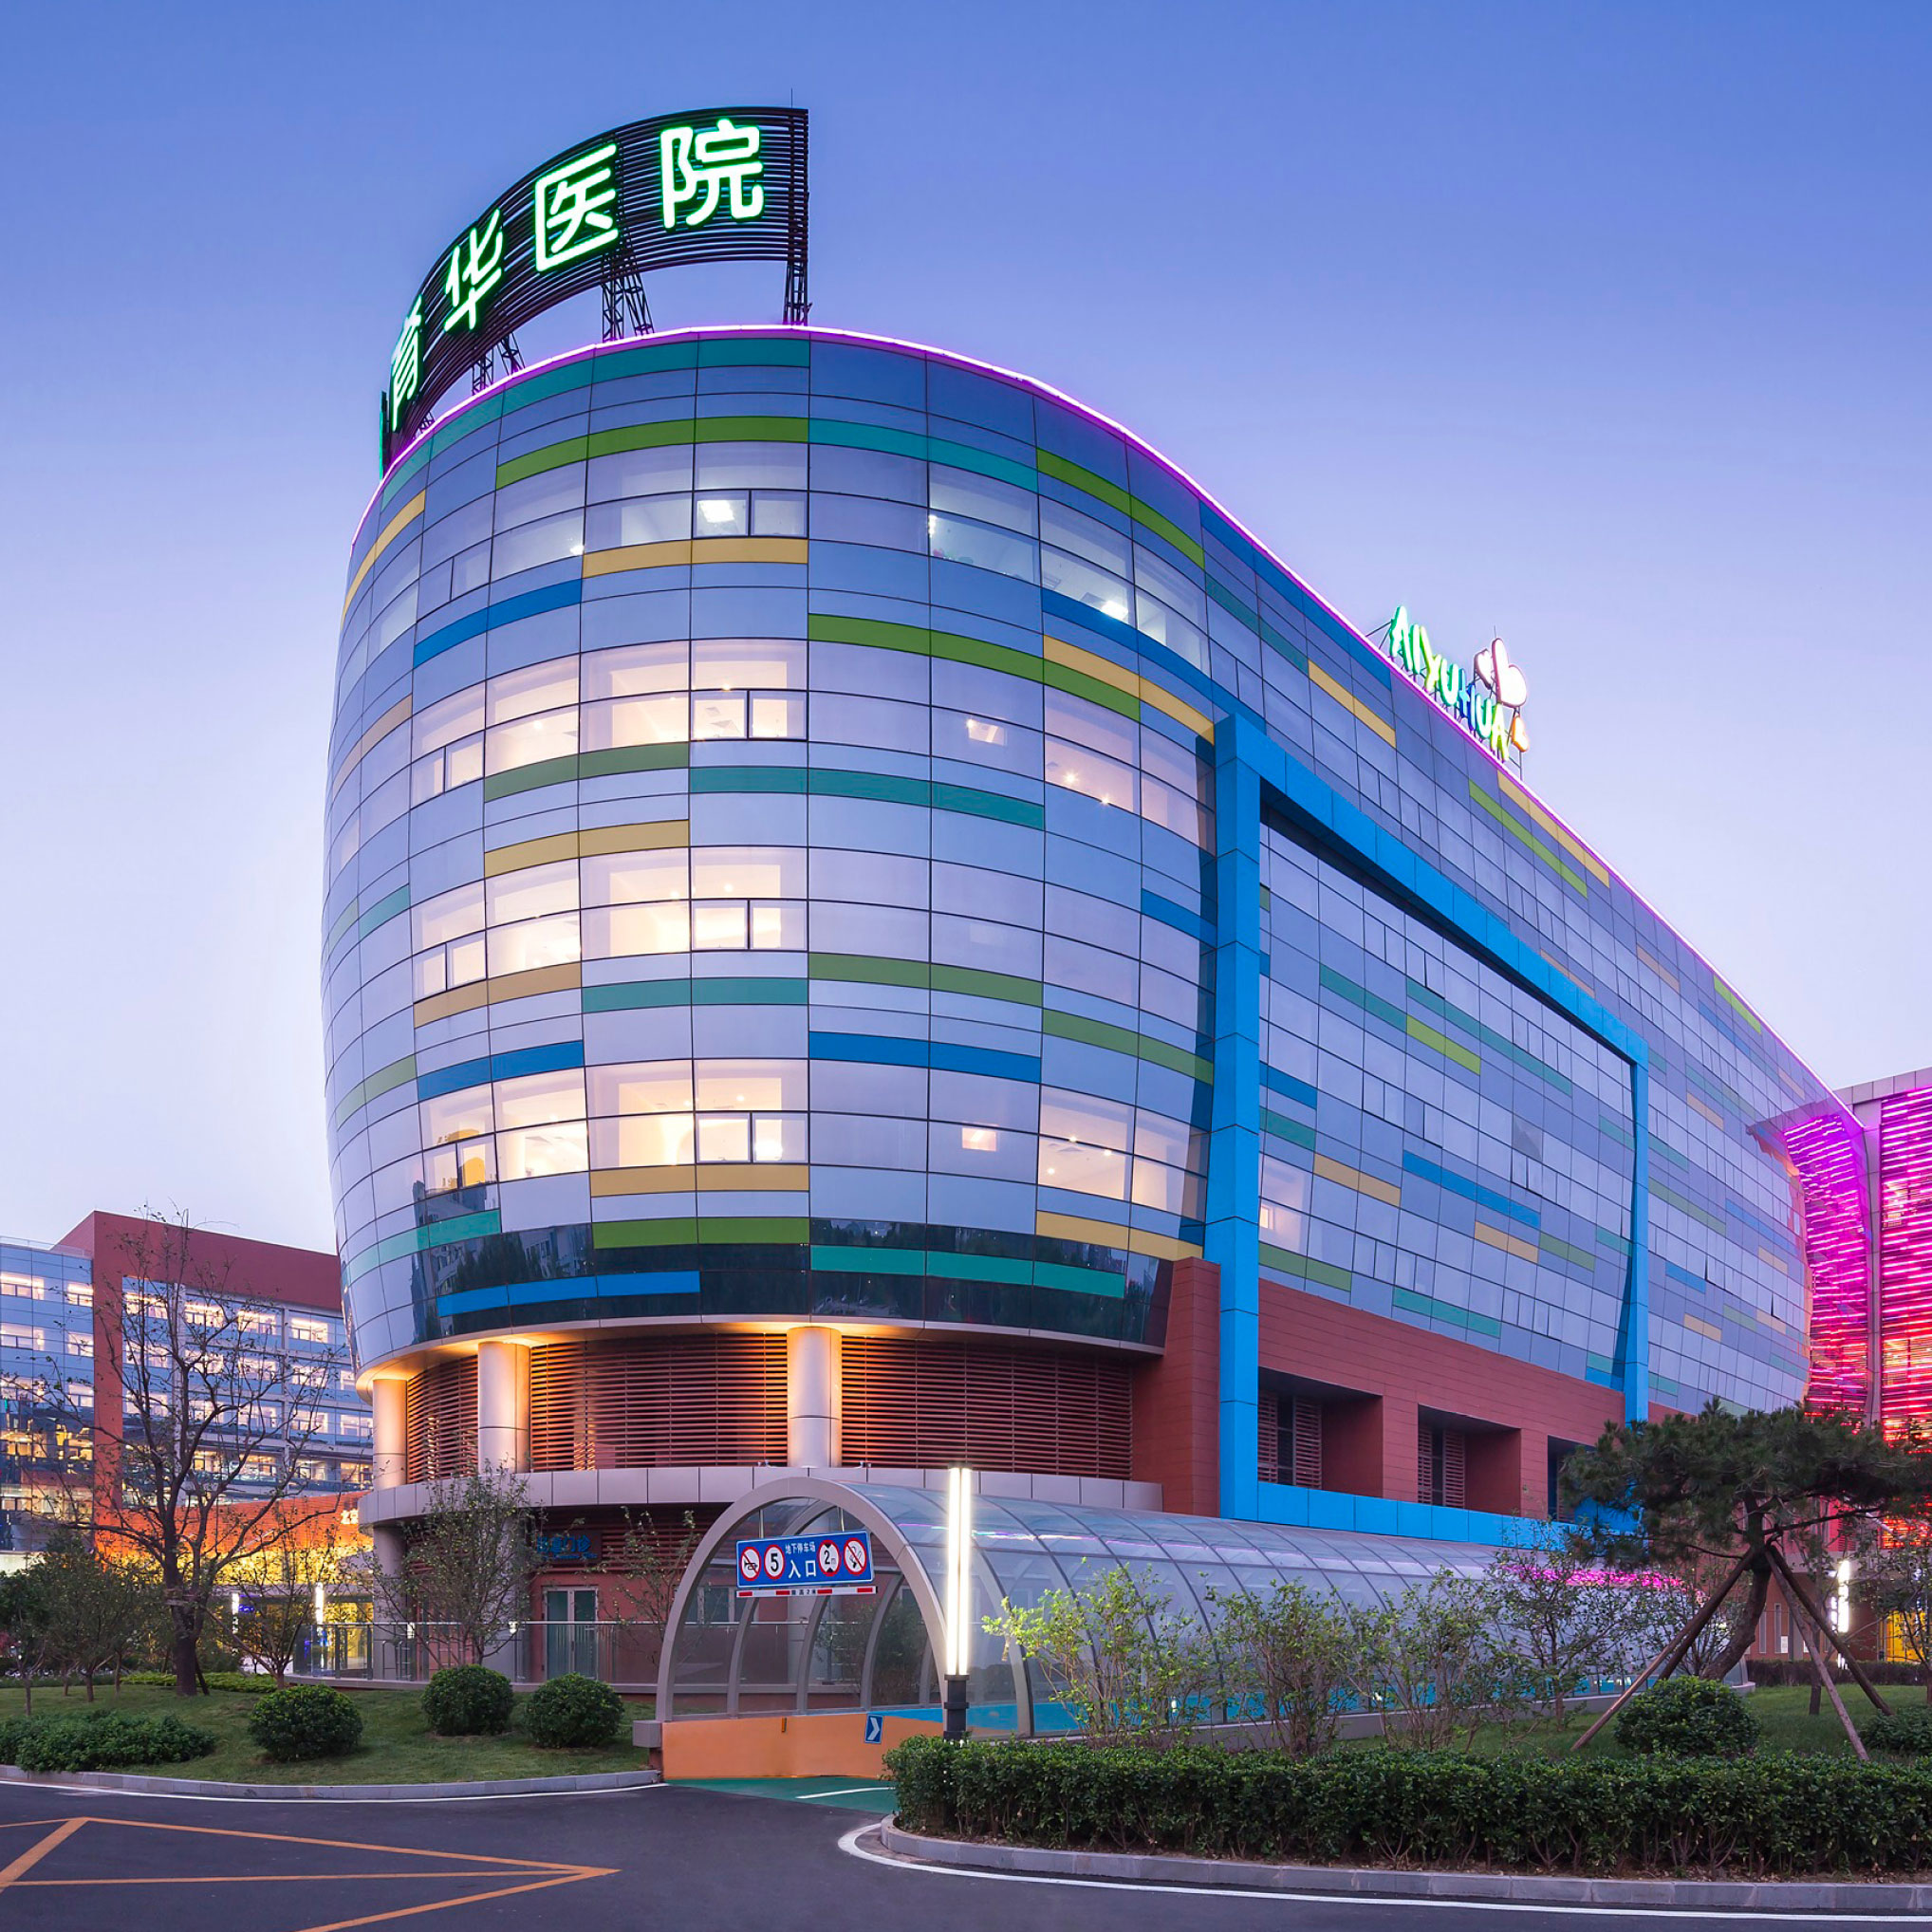 Aiyuhua Hospital for Children and Women